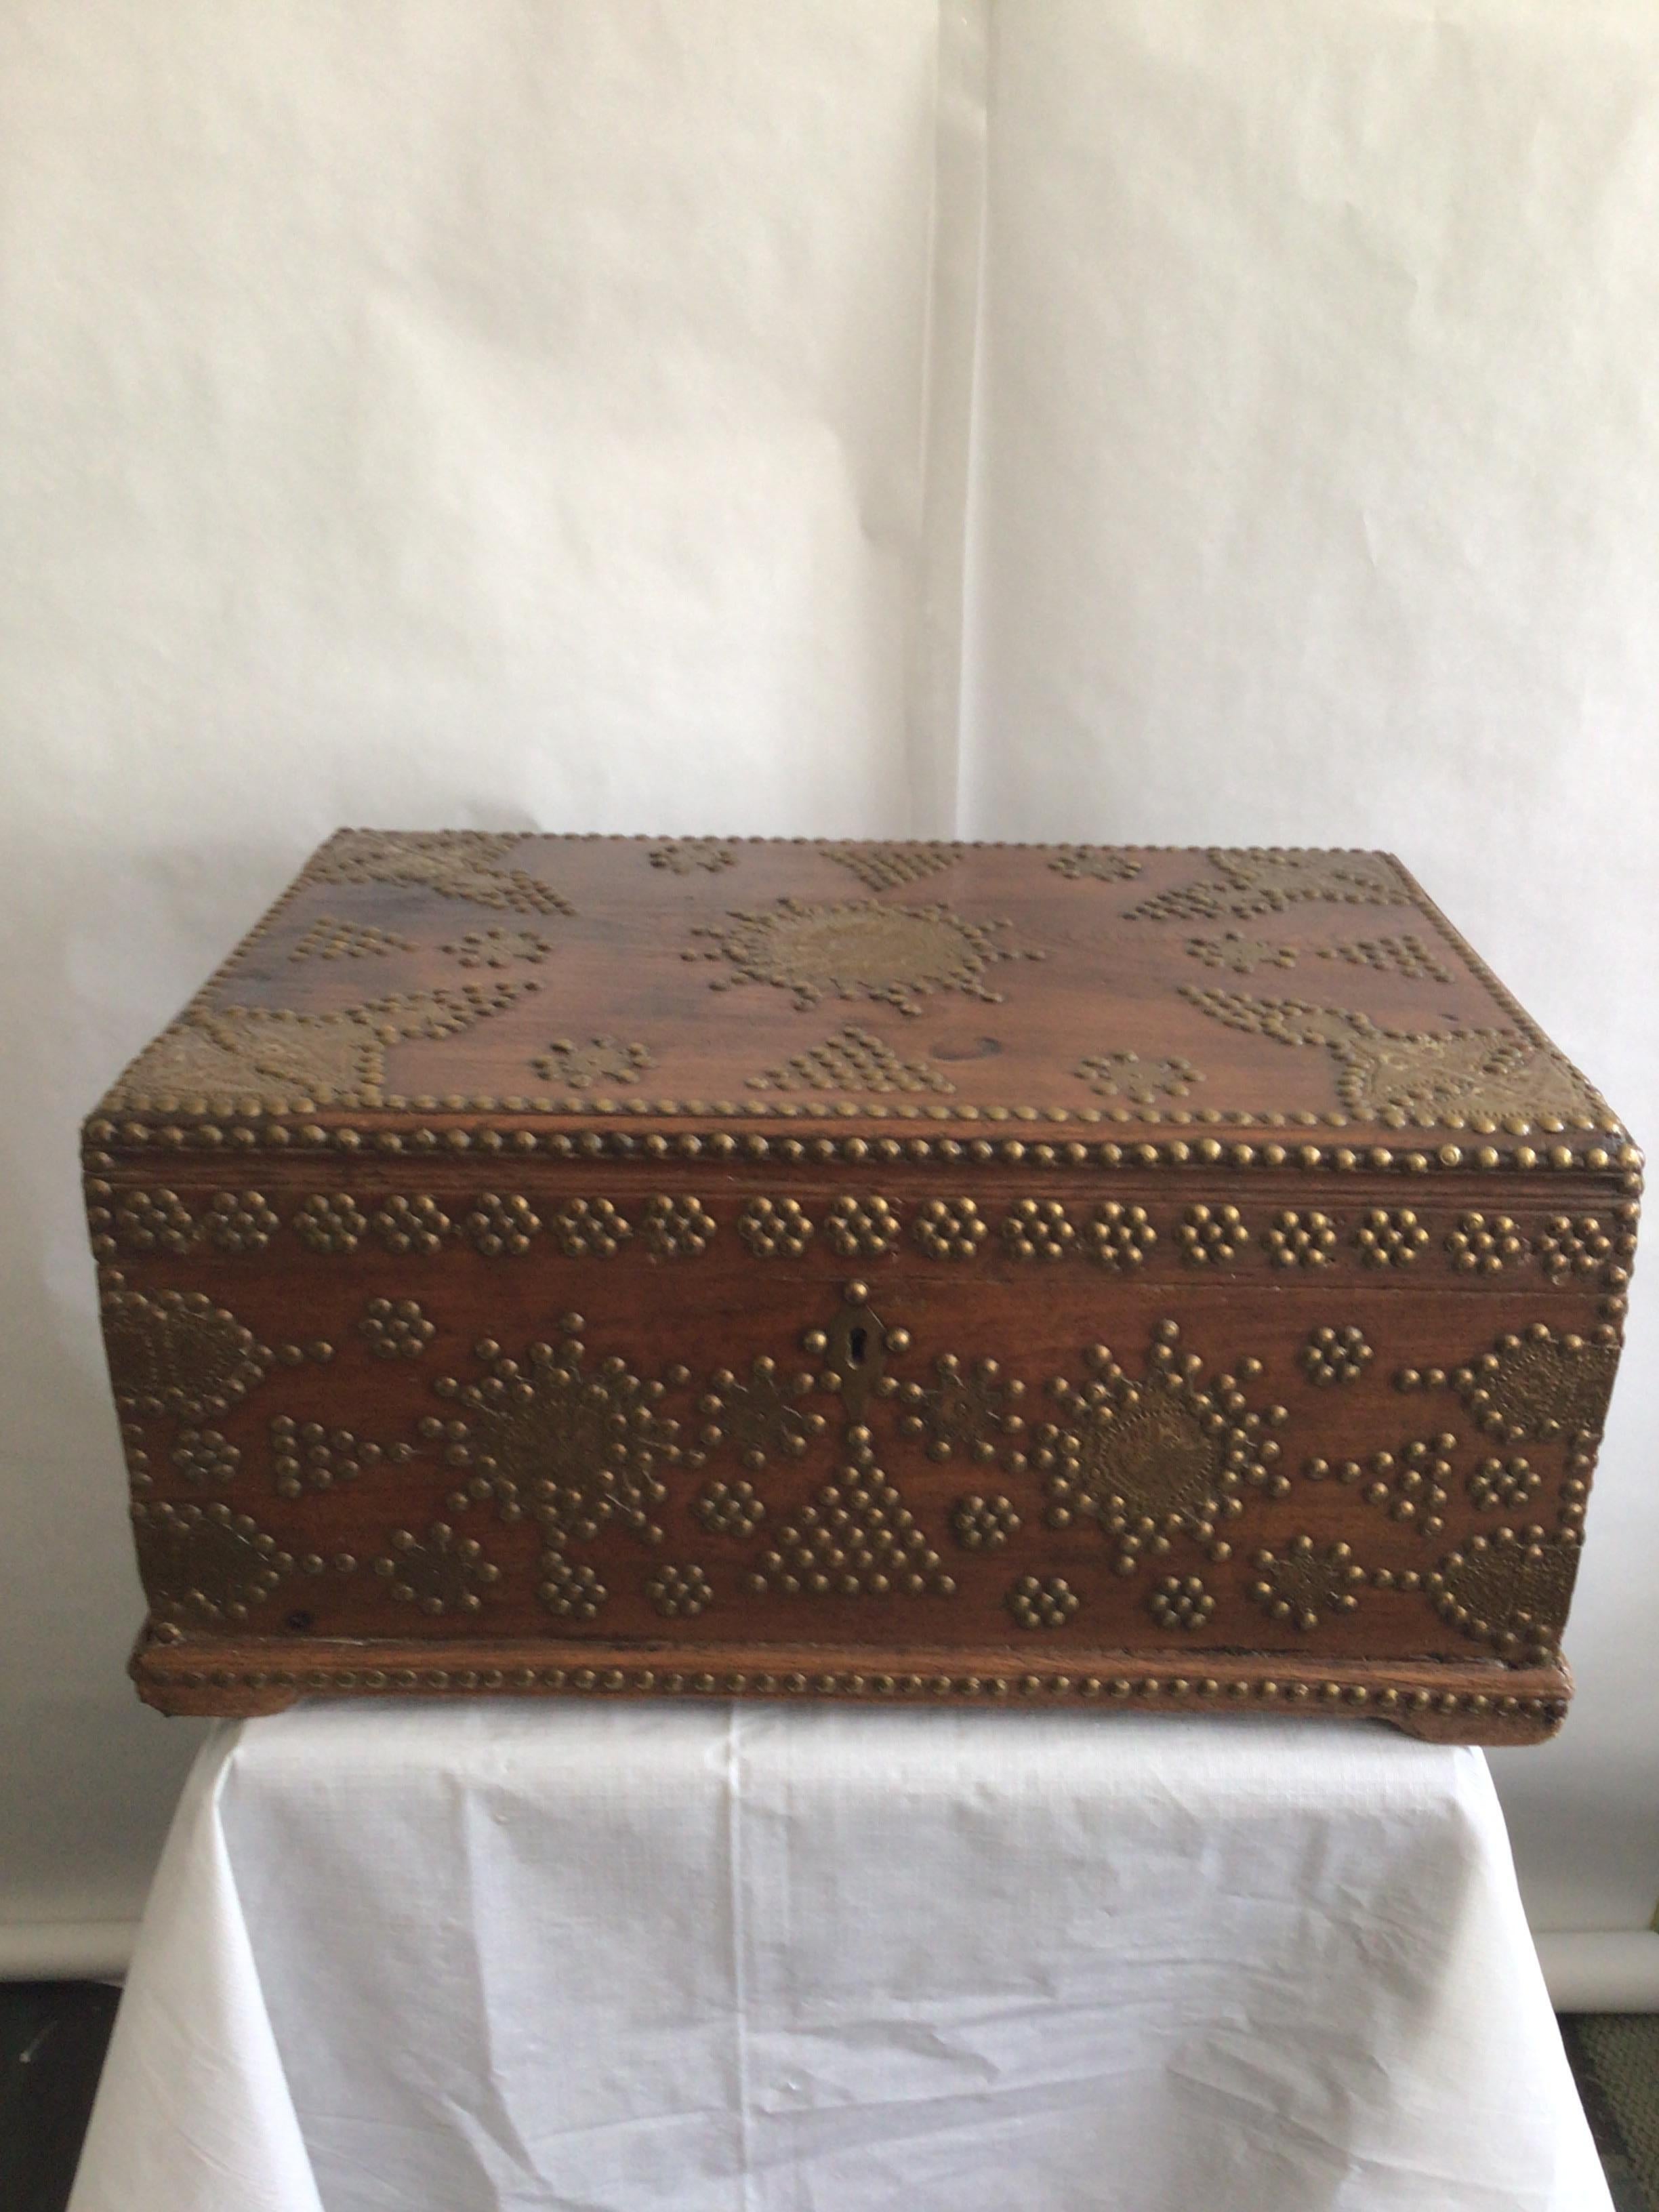 1960s Wood Small Trunk Ornately Embellished With Brass Studs
Removable interior trays 
Keyhole without a key